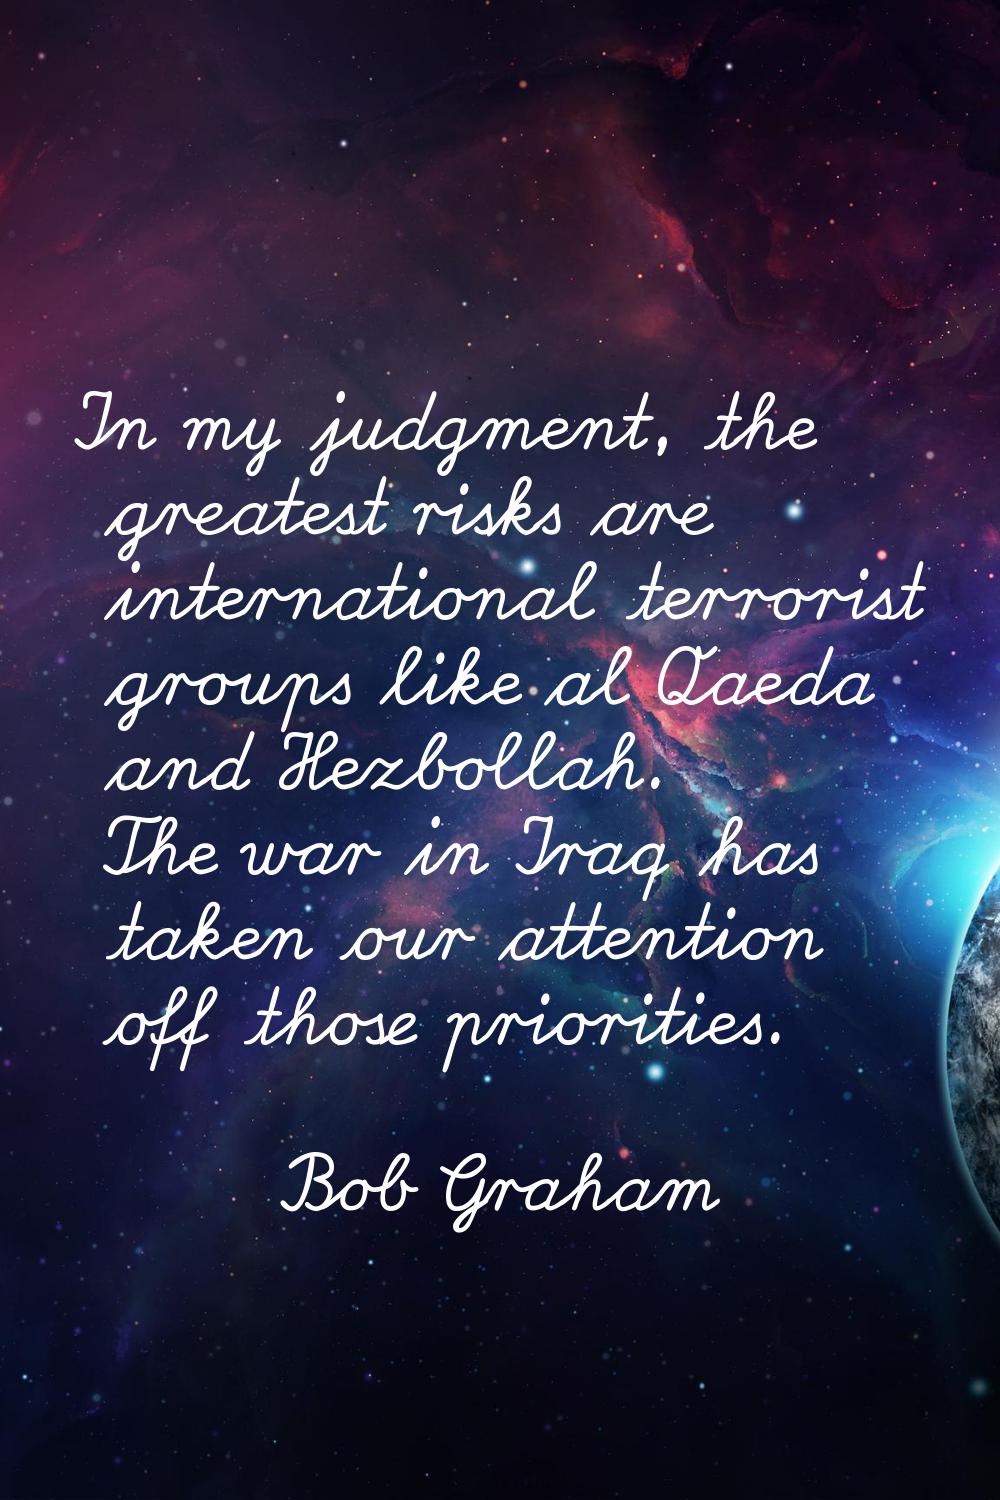 In my judgment, the greatest risks are international terrorist groups like al Qaeda and Hezbollah. 